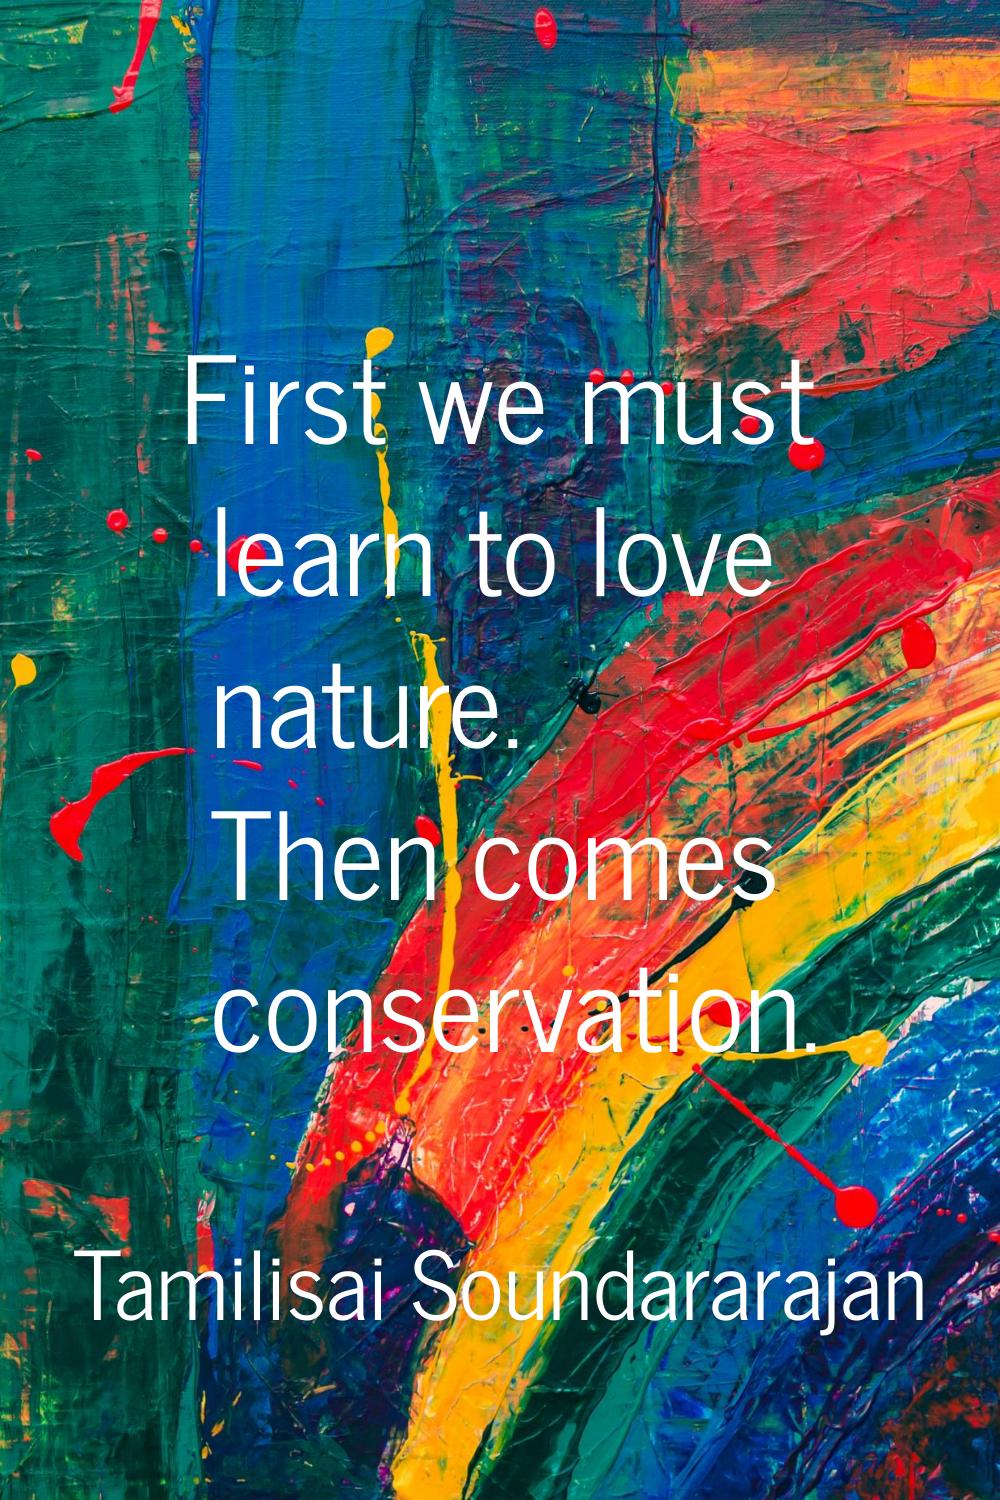 First we must learn to love nature. Then comes conservation.